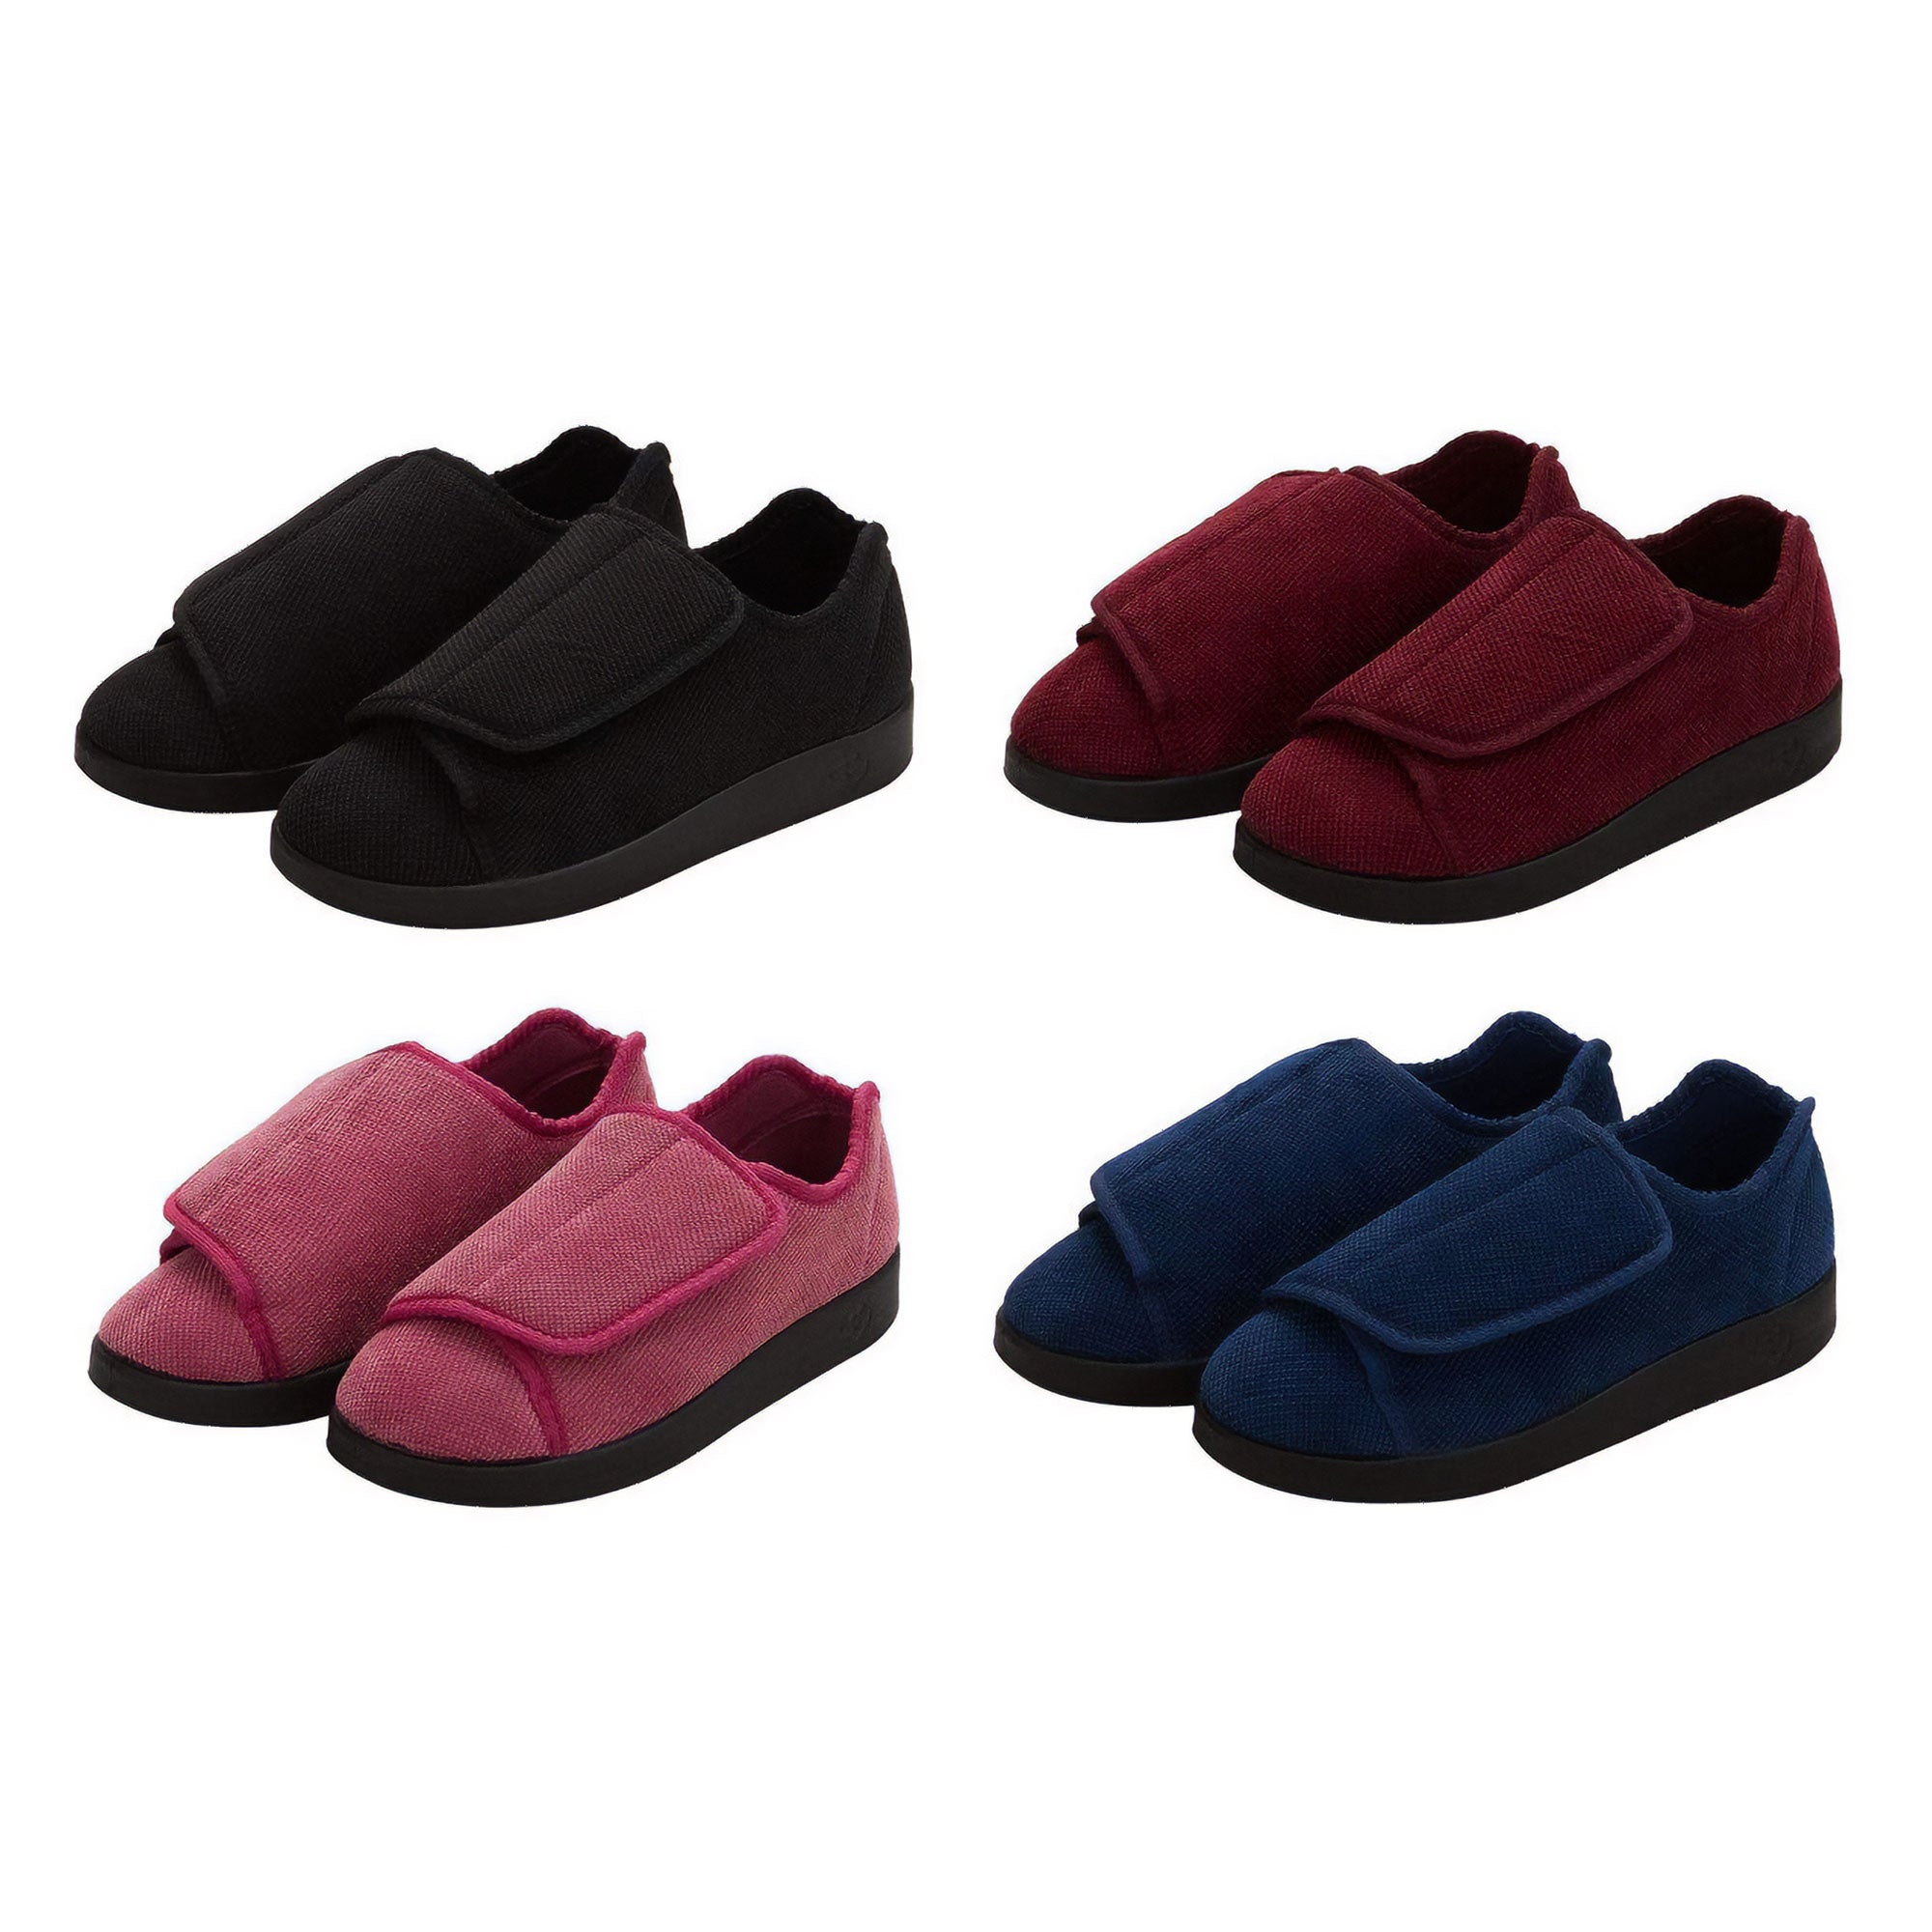 Silverts Women's Antimicrobial Extra Extra Wide Easy-Closure Slippers - Wine - 7